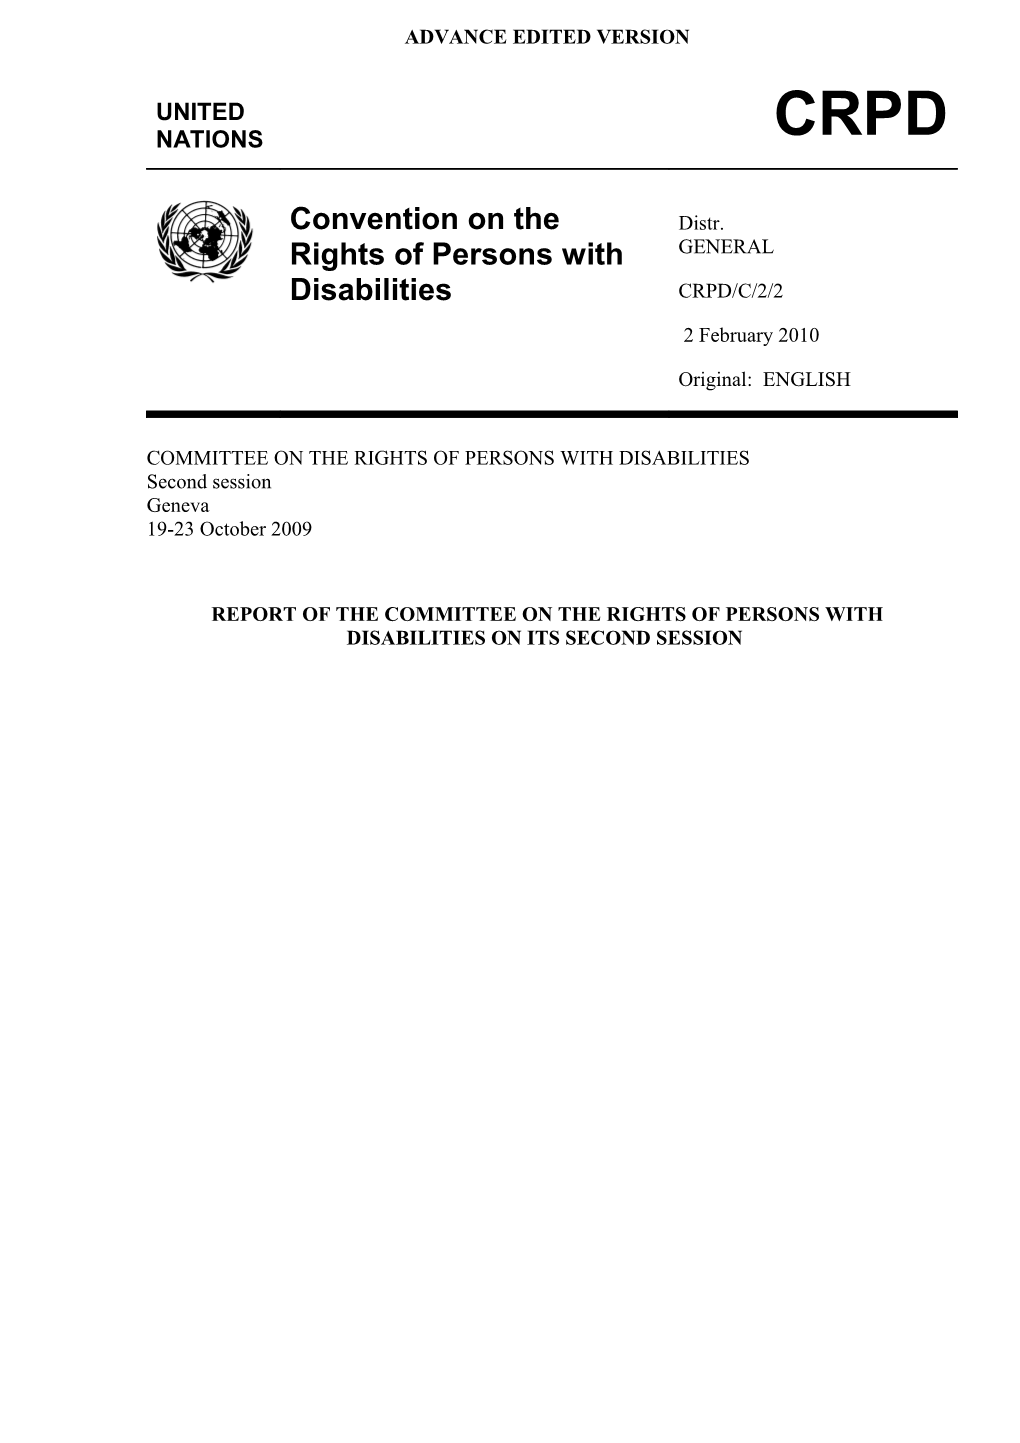 CRPD Report on the First Session